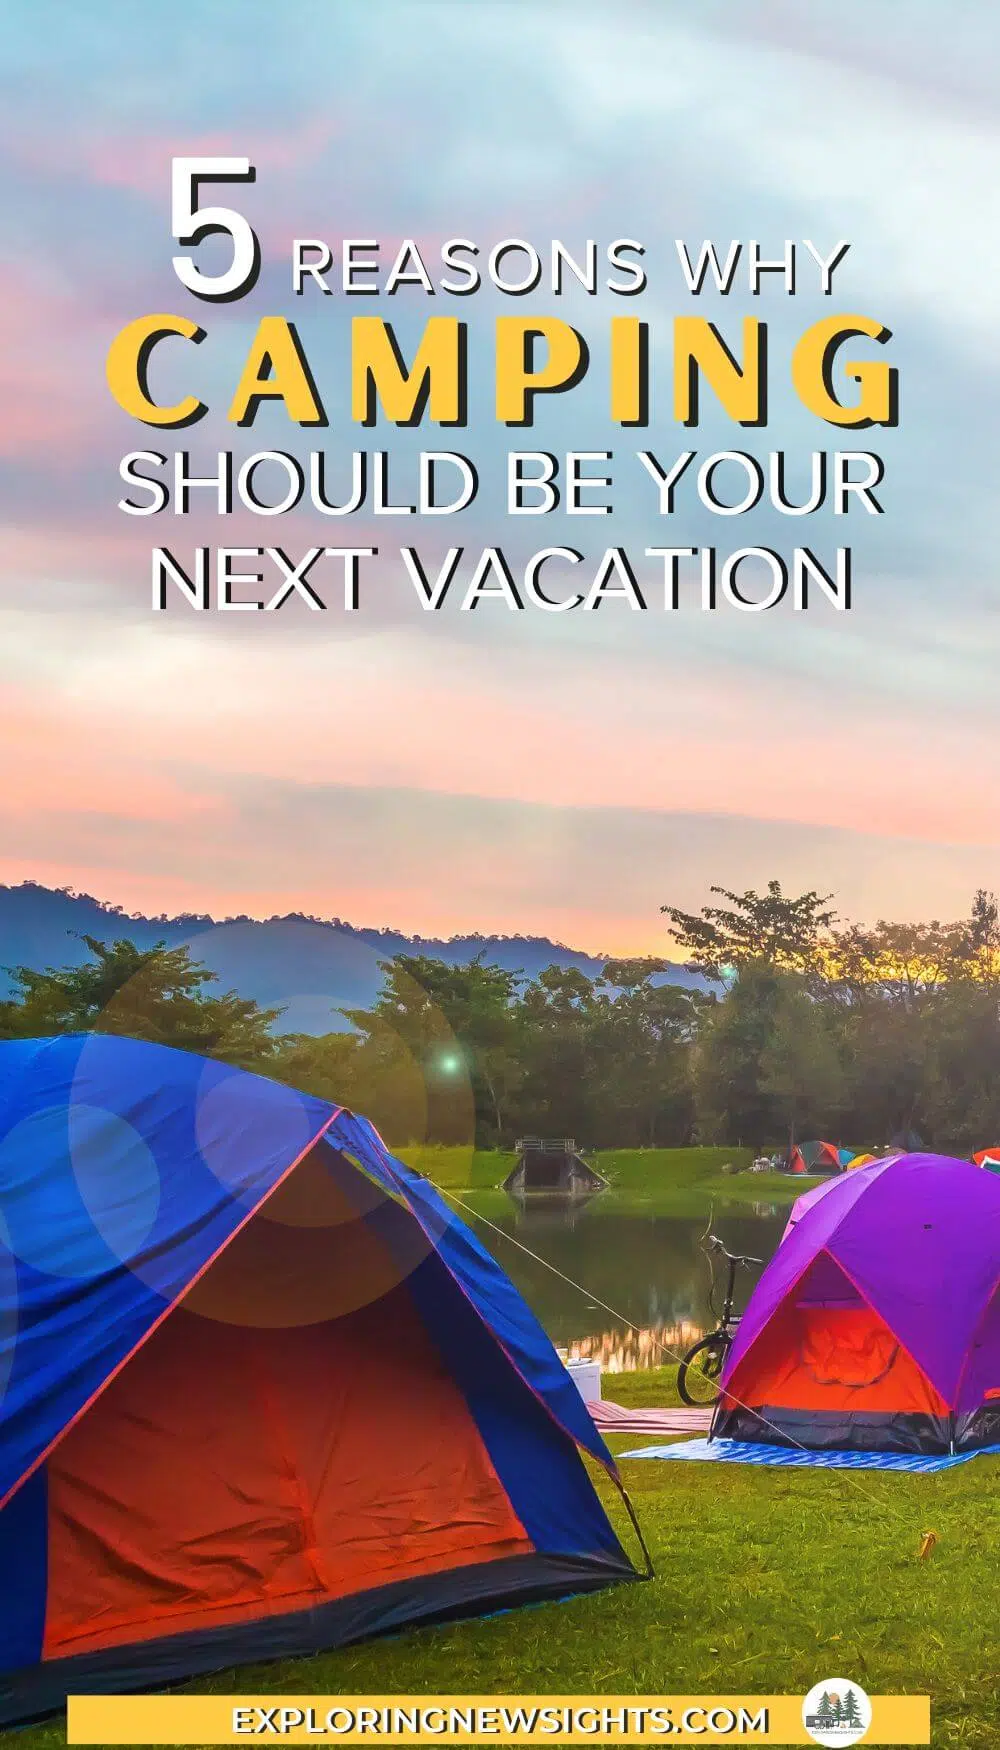 5 Reasons Why Camping Should be Your Next Vacation